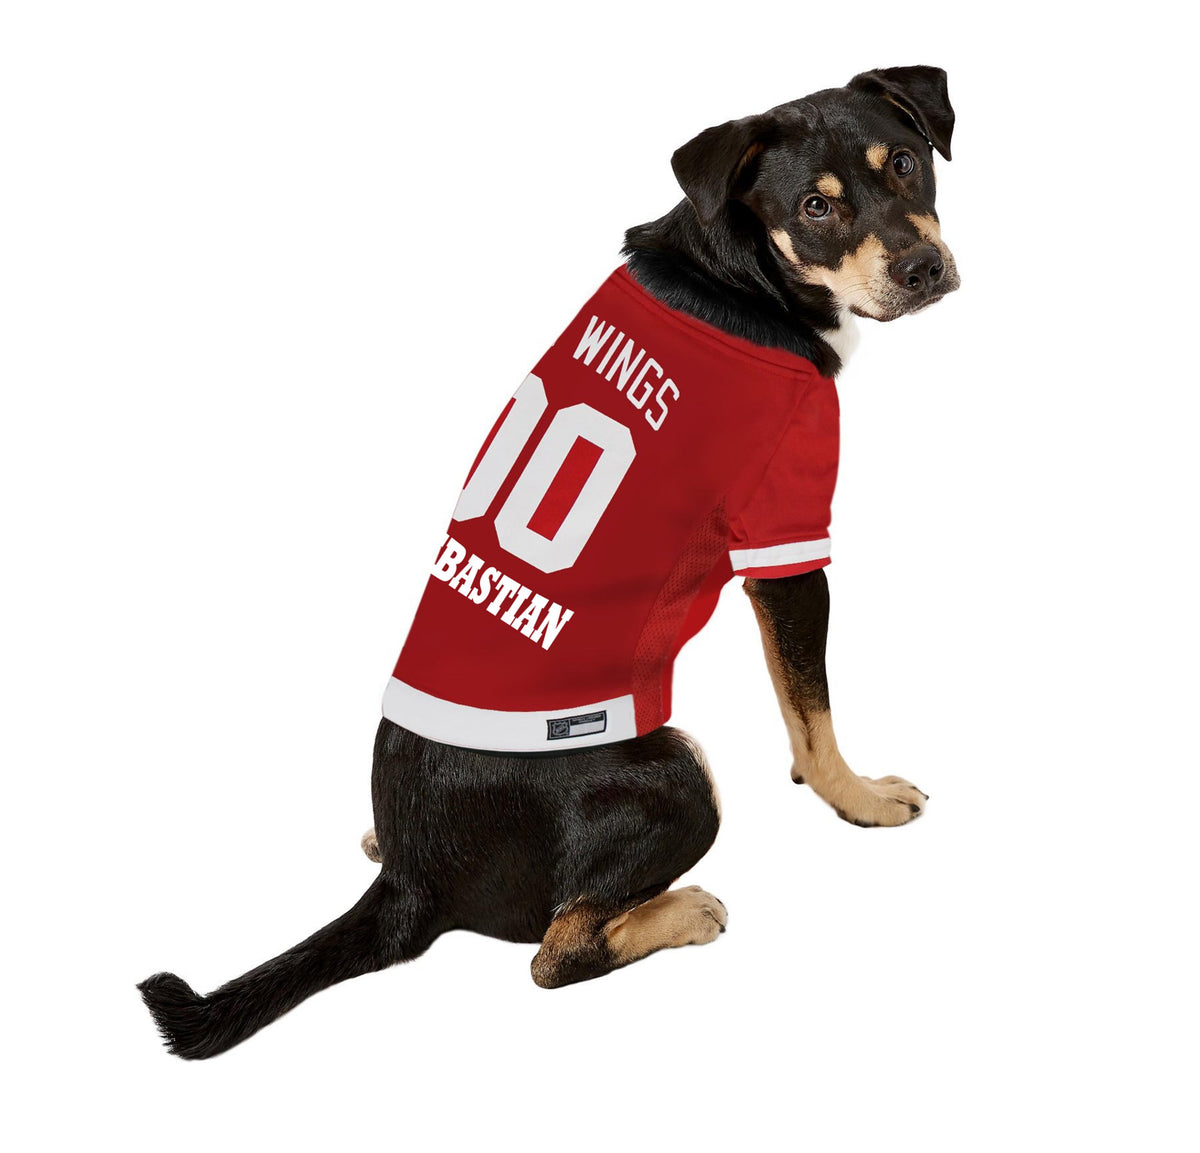 Detroit Red Wings Hockey Pet Jersey, Officially Licensed NHL Gear, Size L